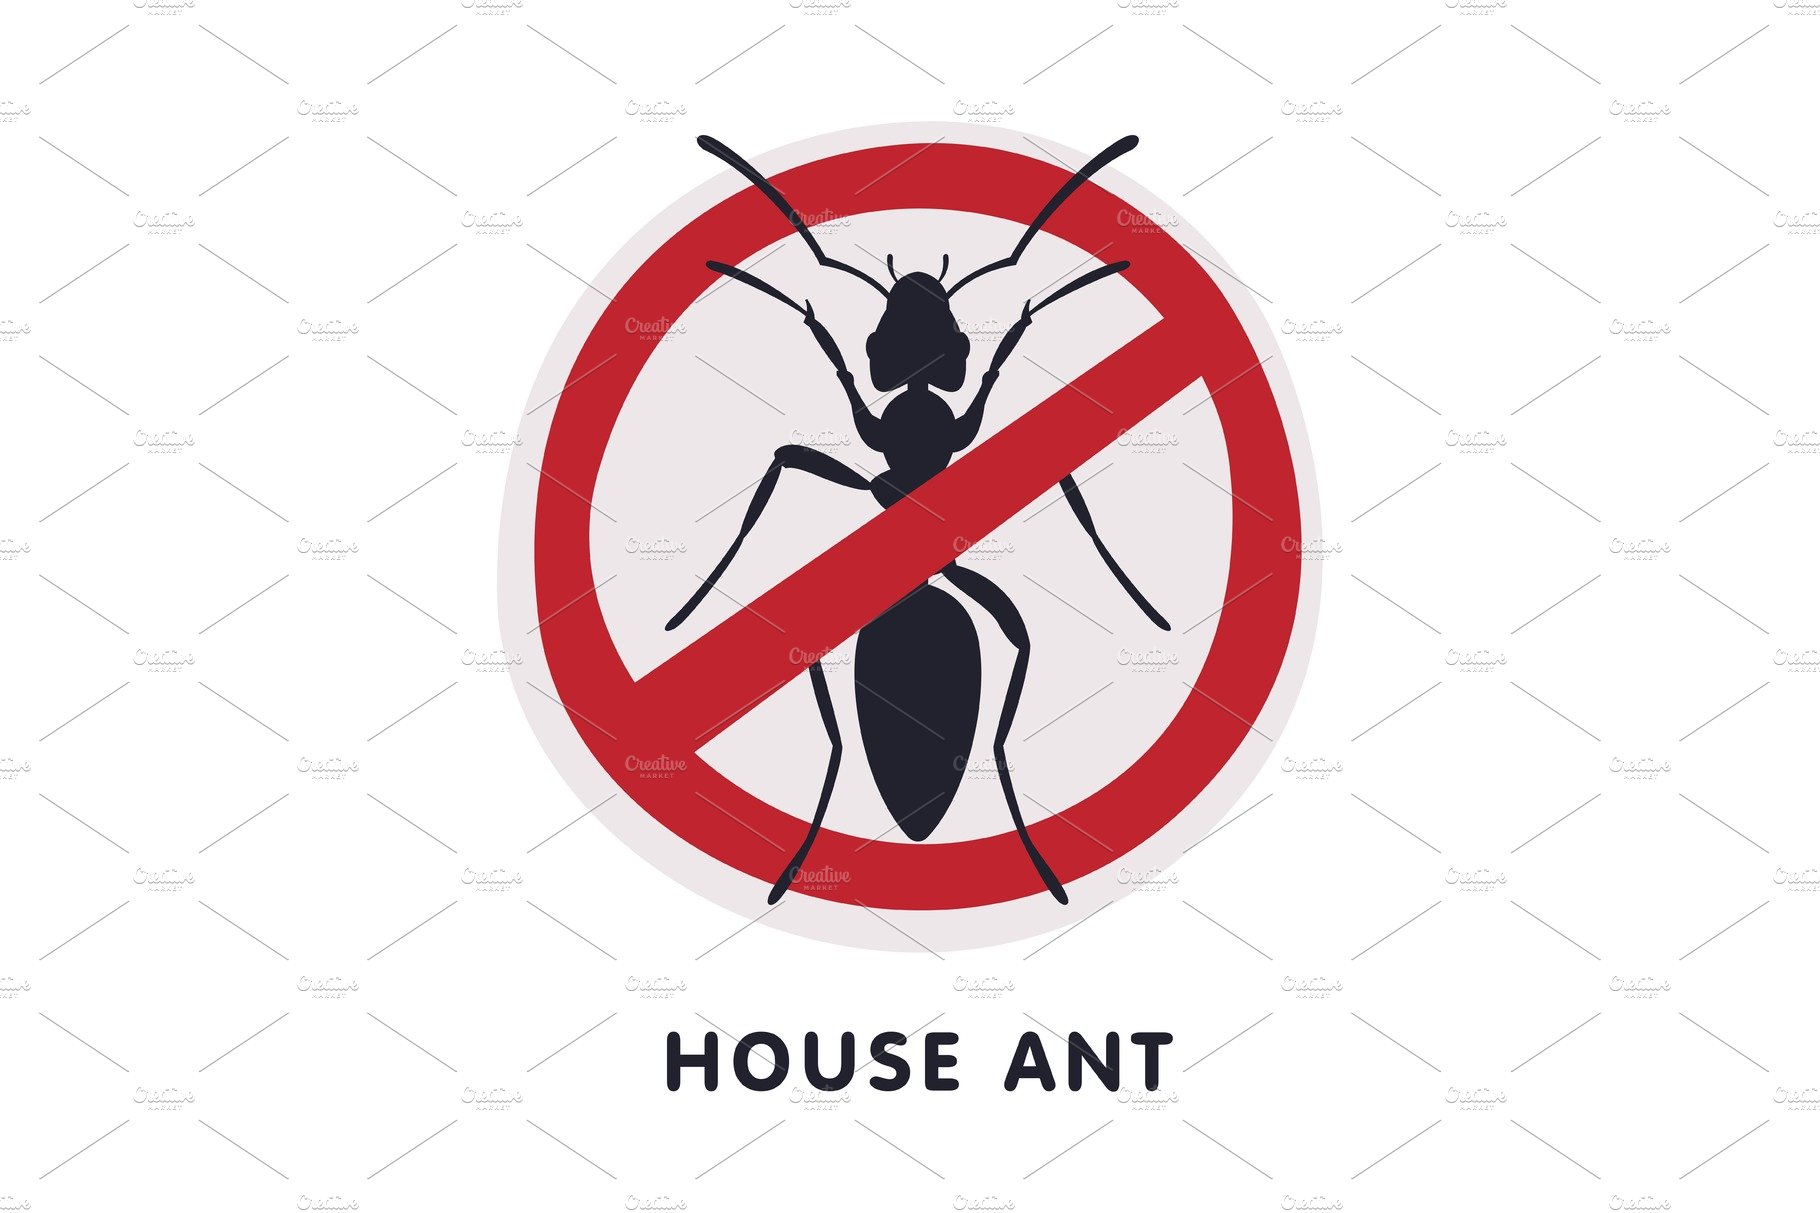 House Ant Insect Prohibition Sign cover image.